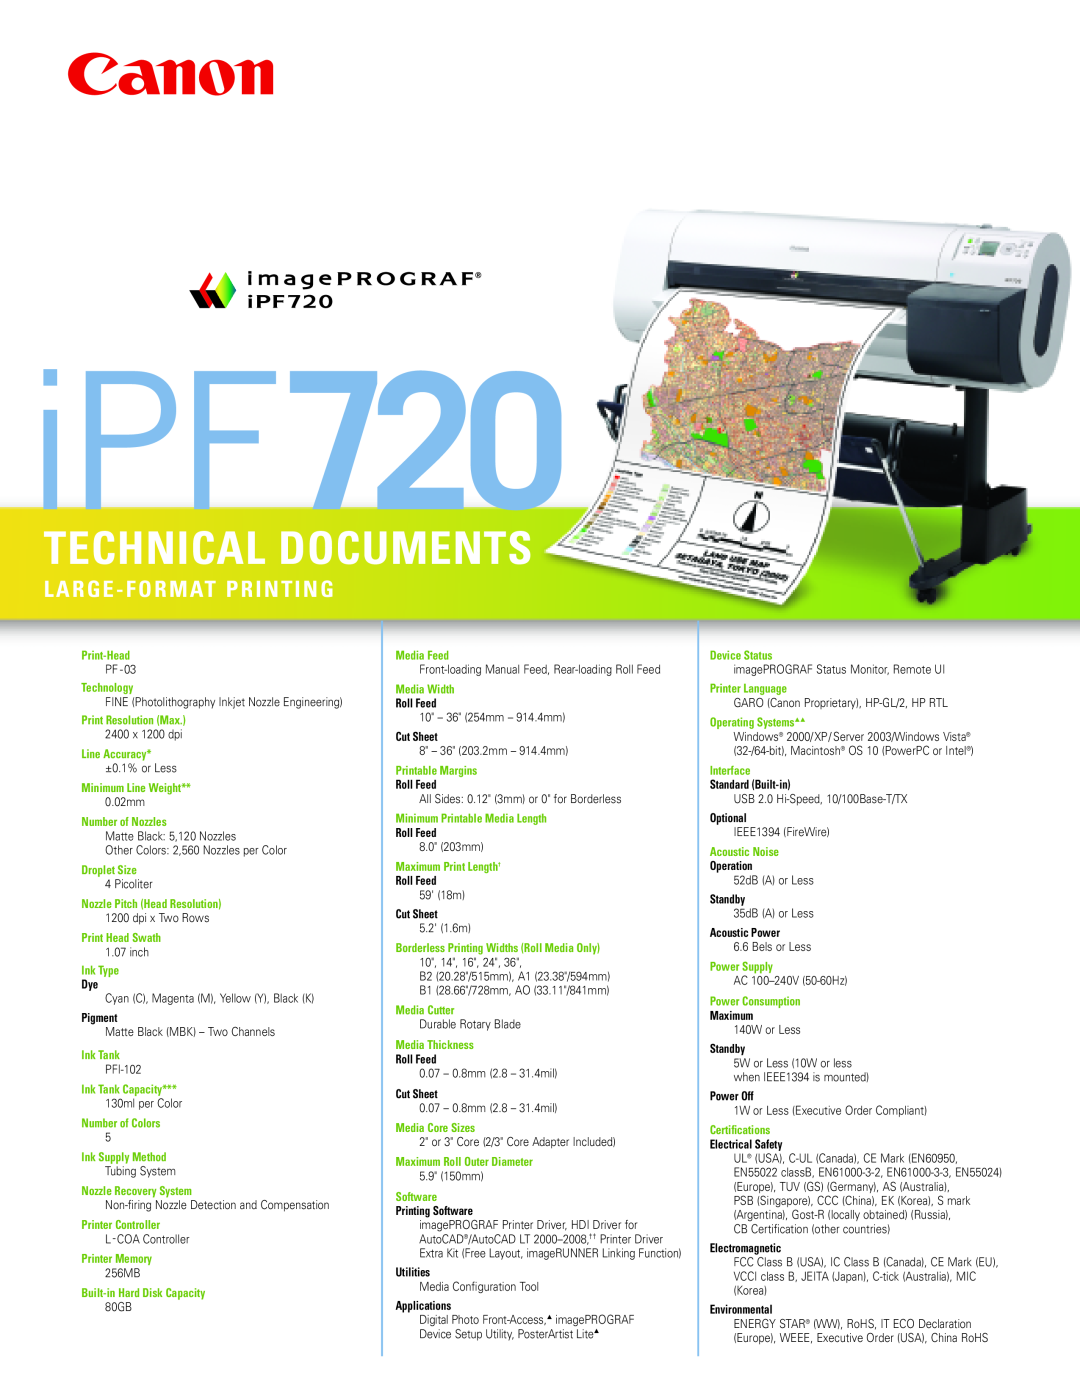 Canon IPF720, IPF605 manual iPF720/710/610/605/500, Technical Documents And General Use, Large-Format Printing Solutions 